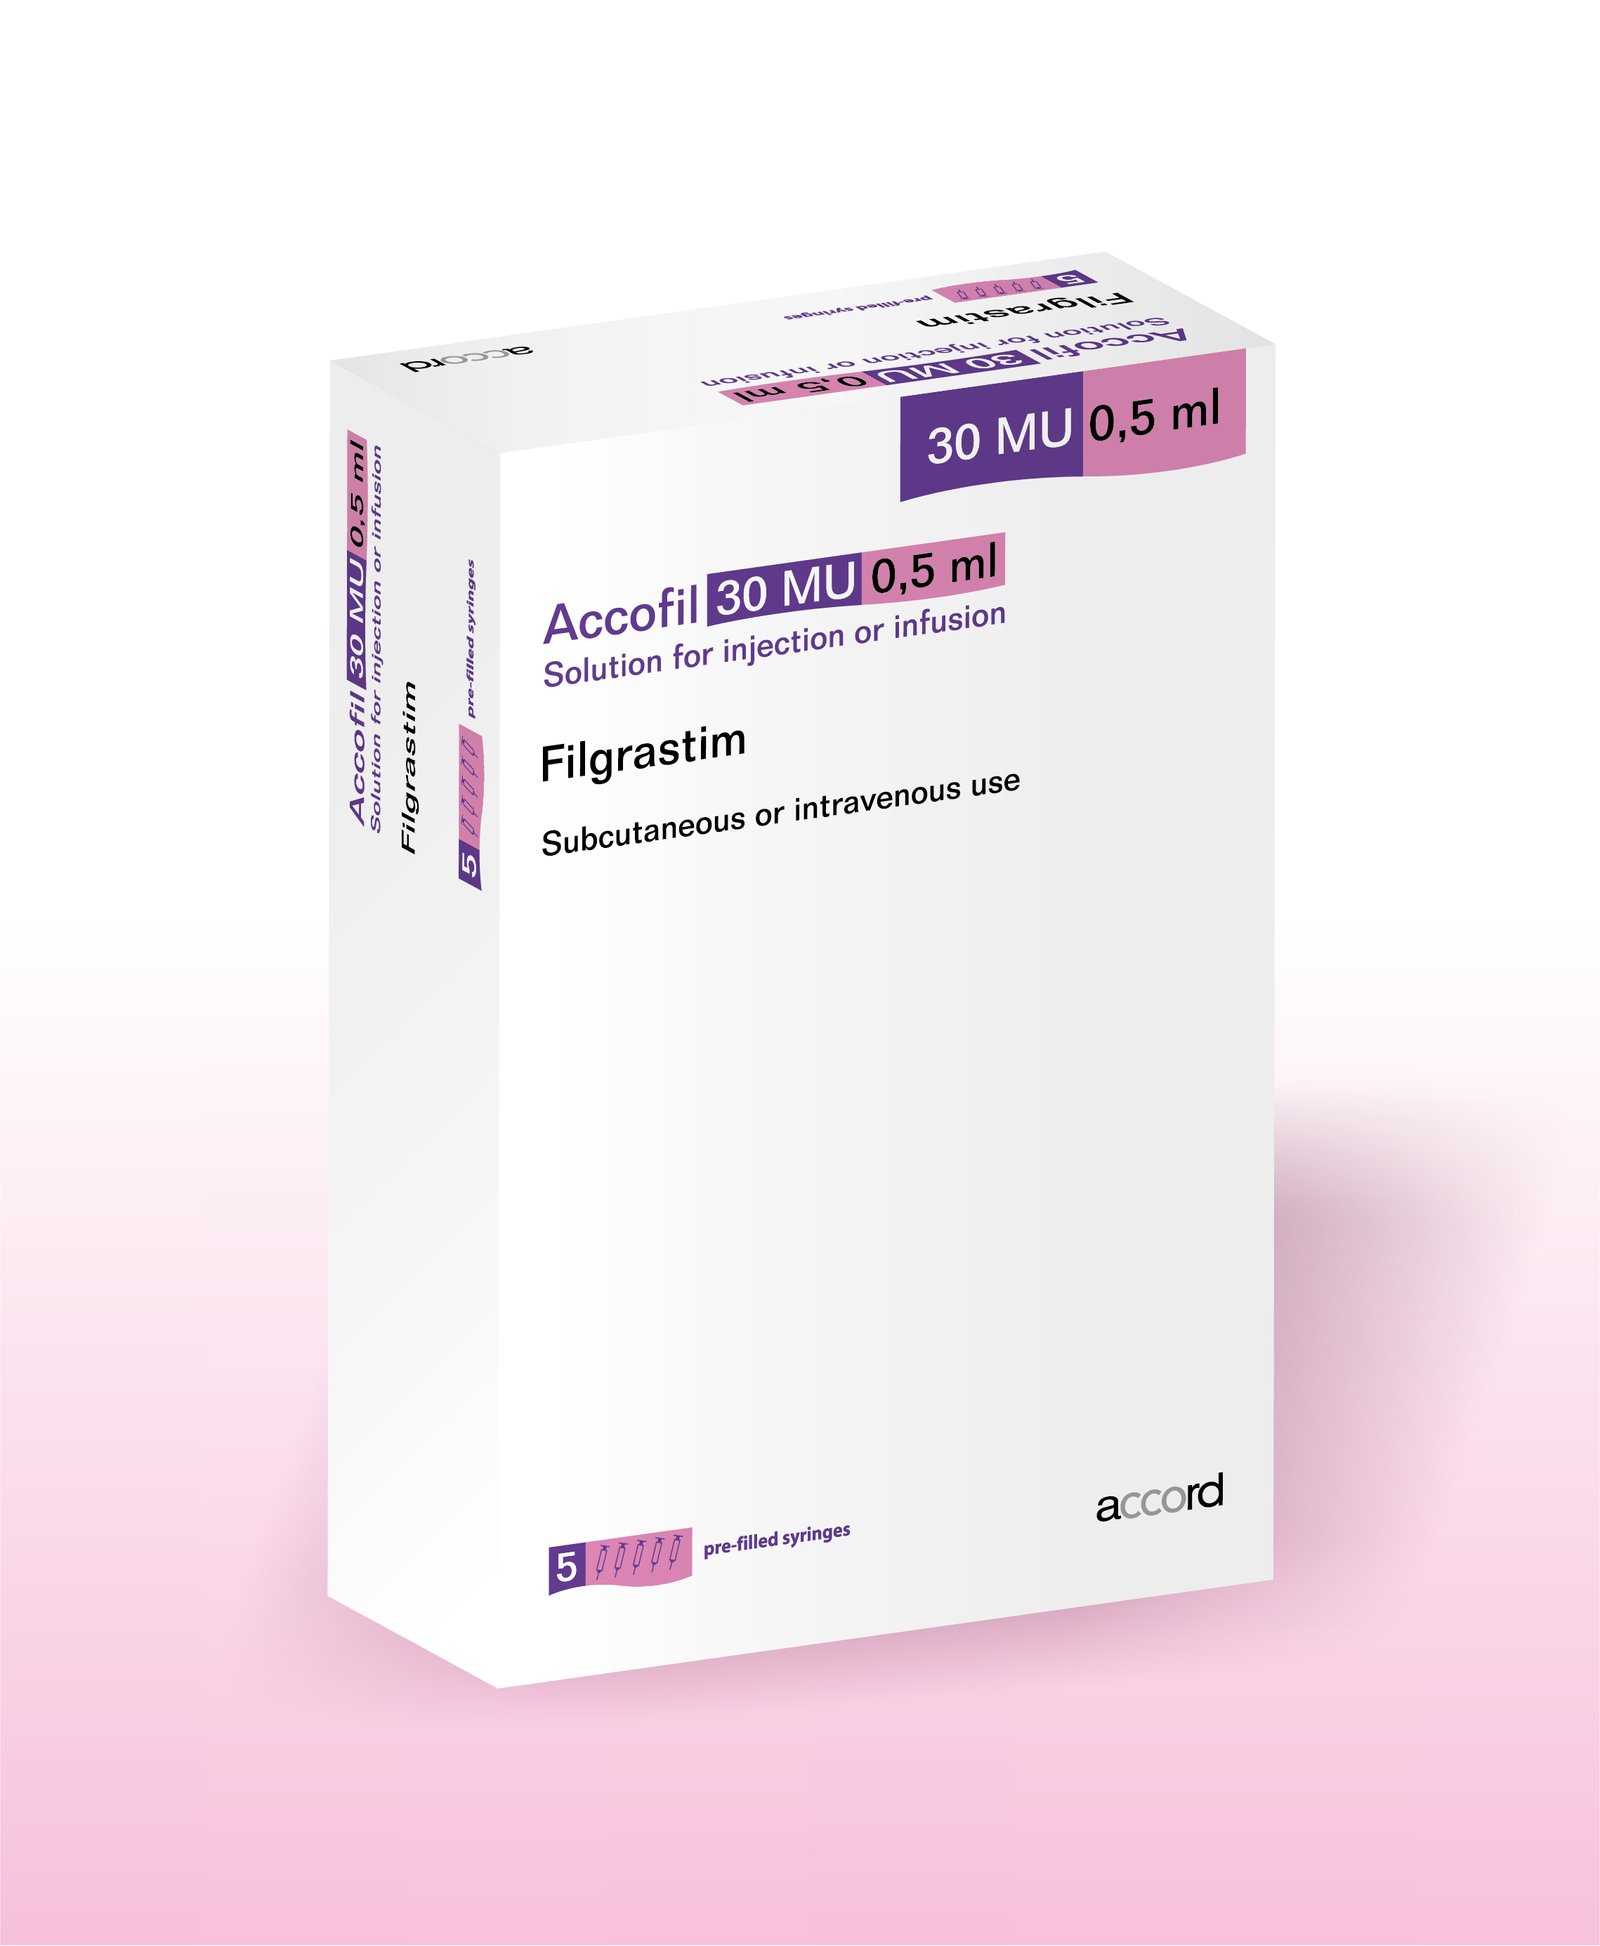 AccofilÂ® is a biosimilar product of NeupogenÂ® (filgrastim) and will offer patients cost effective therapy that is comparable in quality, safety and efficacy. 